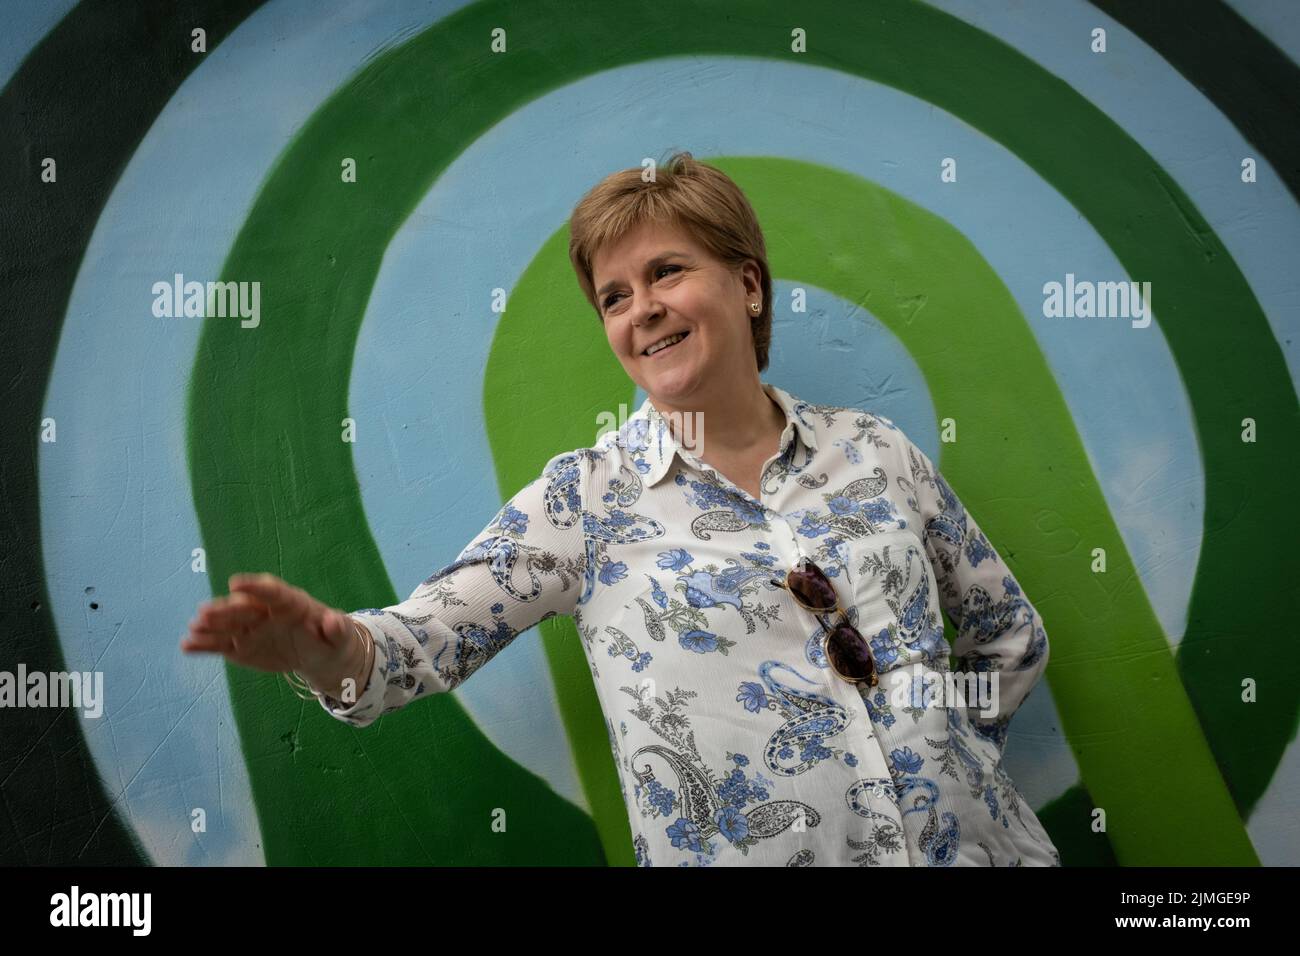 Glasgow, UK, 6th August 2022. Scottish First Minister Nicola Sturgeon made an appearance and short speech to open the Govanhill International Festival and Carnival in Queen’s Park, in Glasgow, Scotland, 6 August 2022. Photo credit: Jeremy Sutton-Hibbert/Alamy Live News. Stock Photo